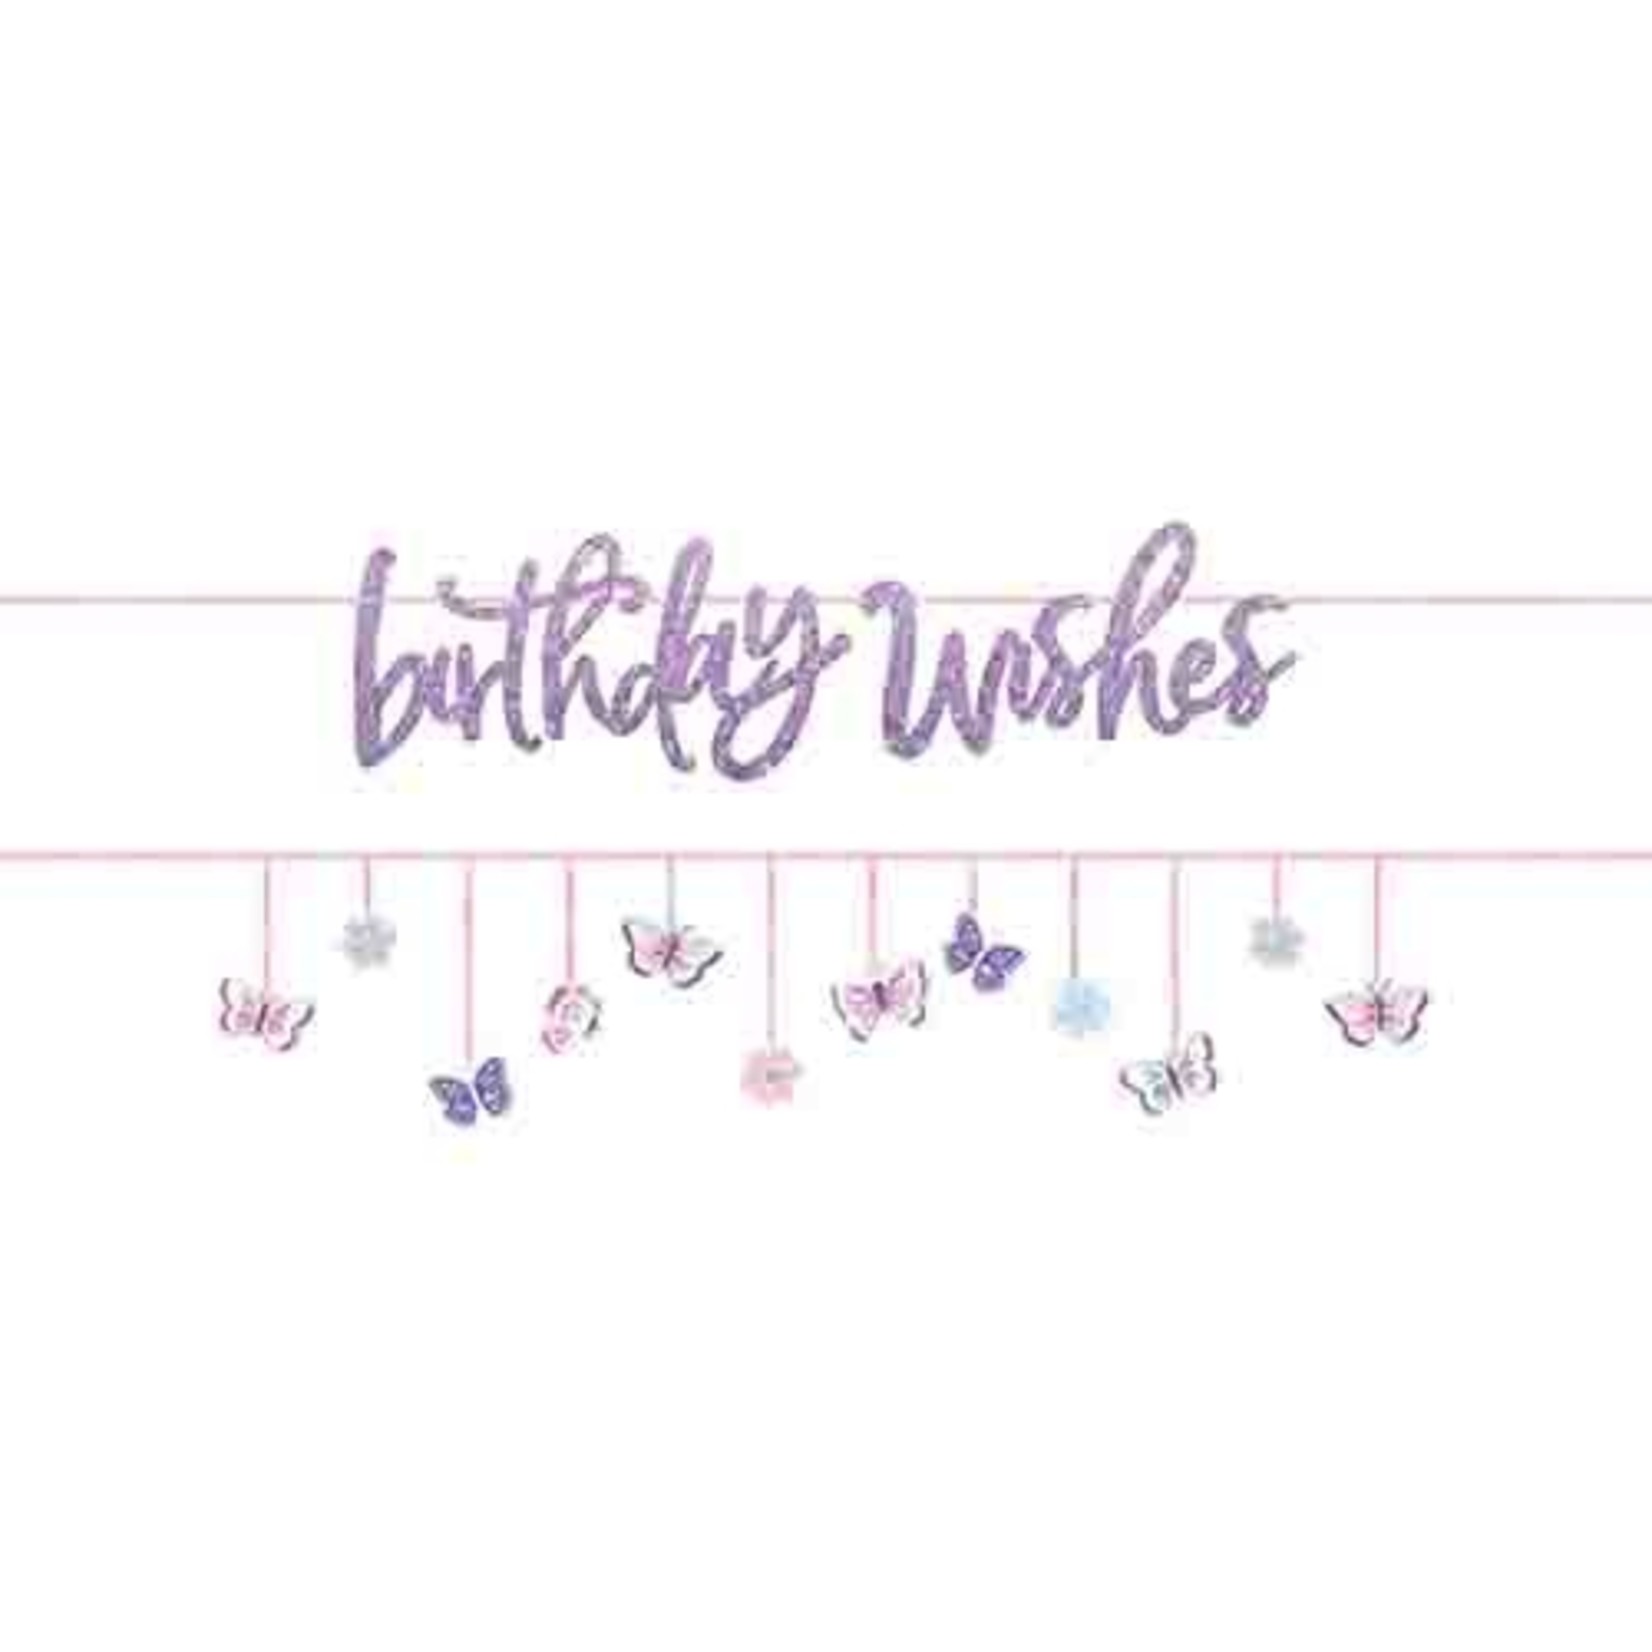 Amscan Butterfly Birthday Wishes Glitter Banners - 2ct.